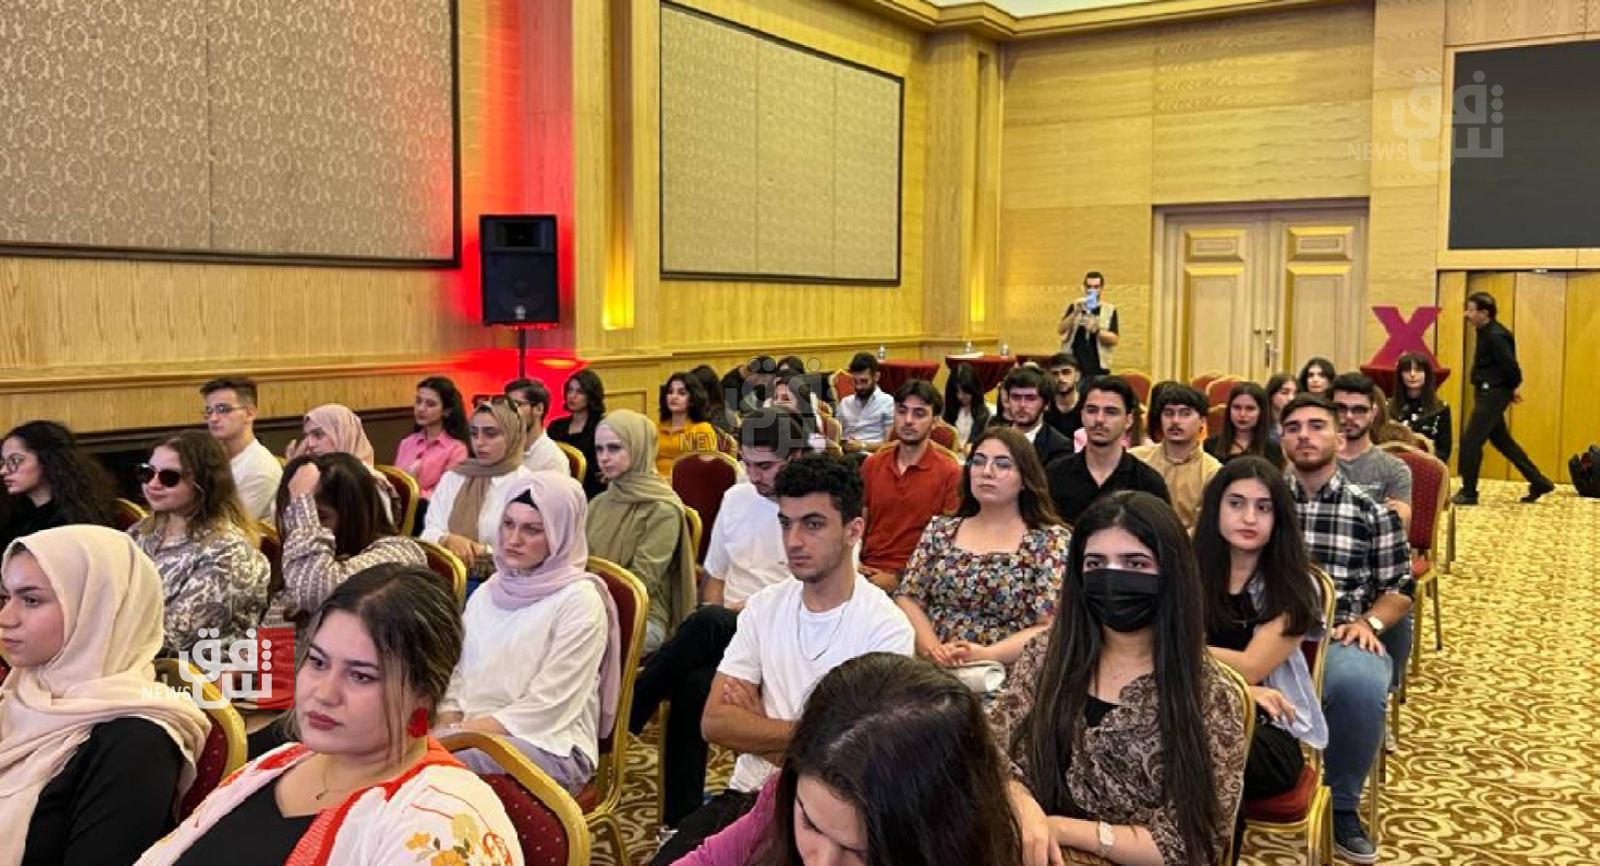 KRG representative: fighting drug abuse and unemployment among youth is a priority 